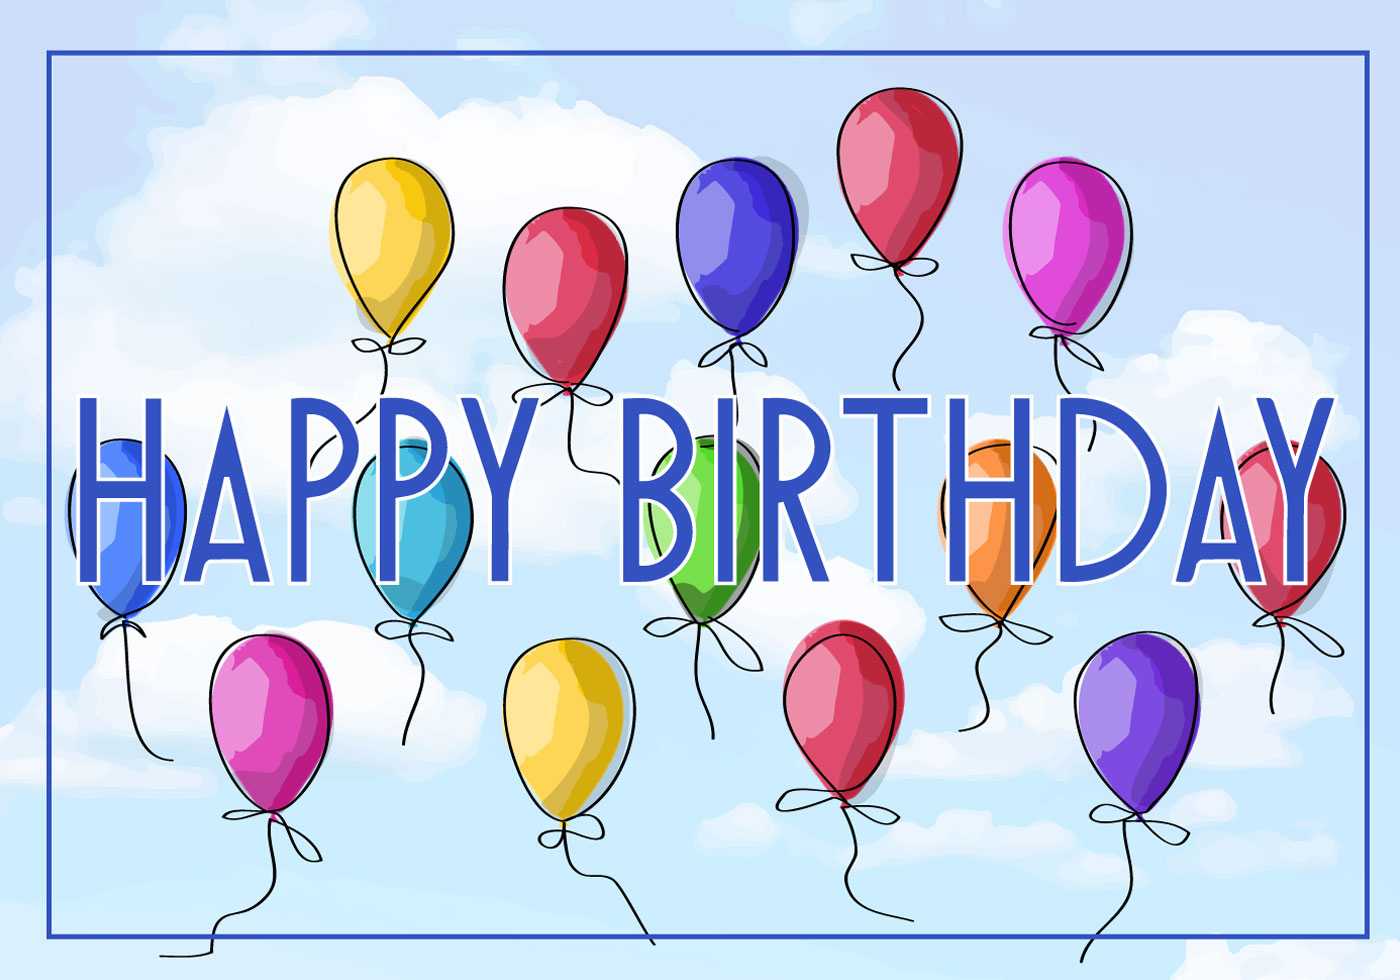 Free Vector Illustration Of A Happy Birthday Greeting Card Intended For Free Happy Birthday Banner Templates Download